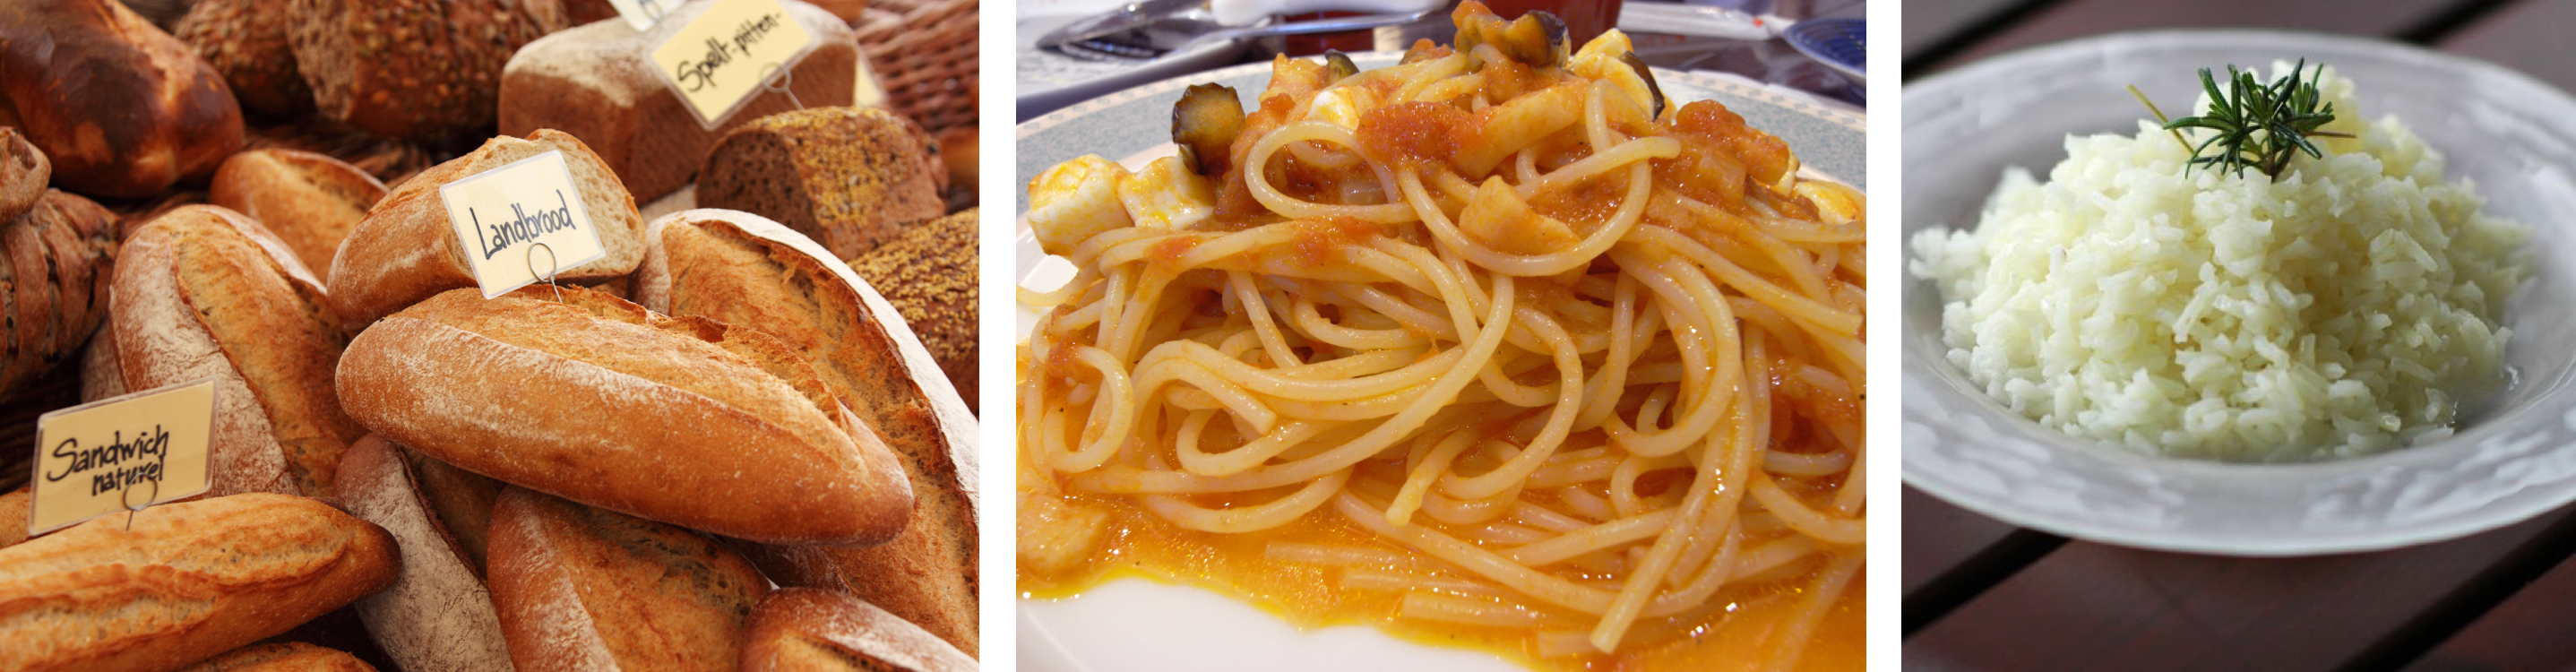 Photos of grain-based foods, from left to right: a display of bread in a bakery, a plate of spaghetti with sauce, and a bowl of plain rice topped with herbs.